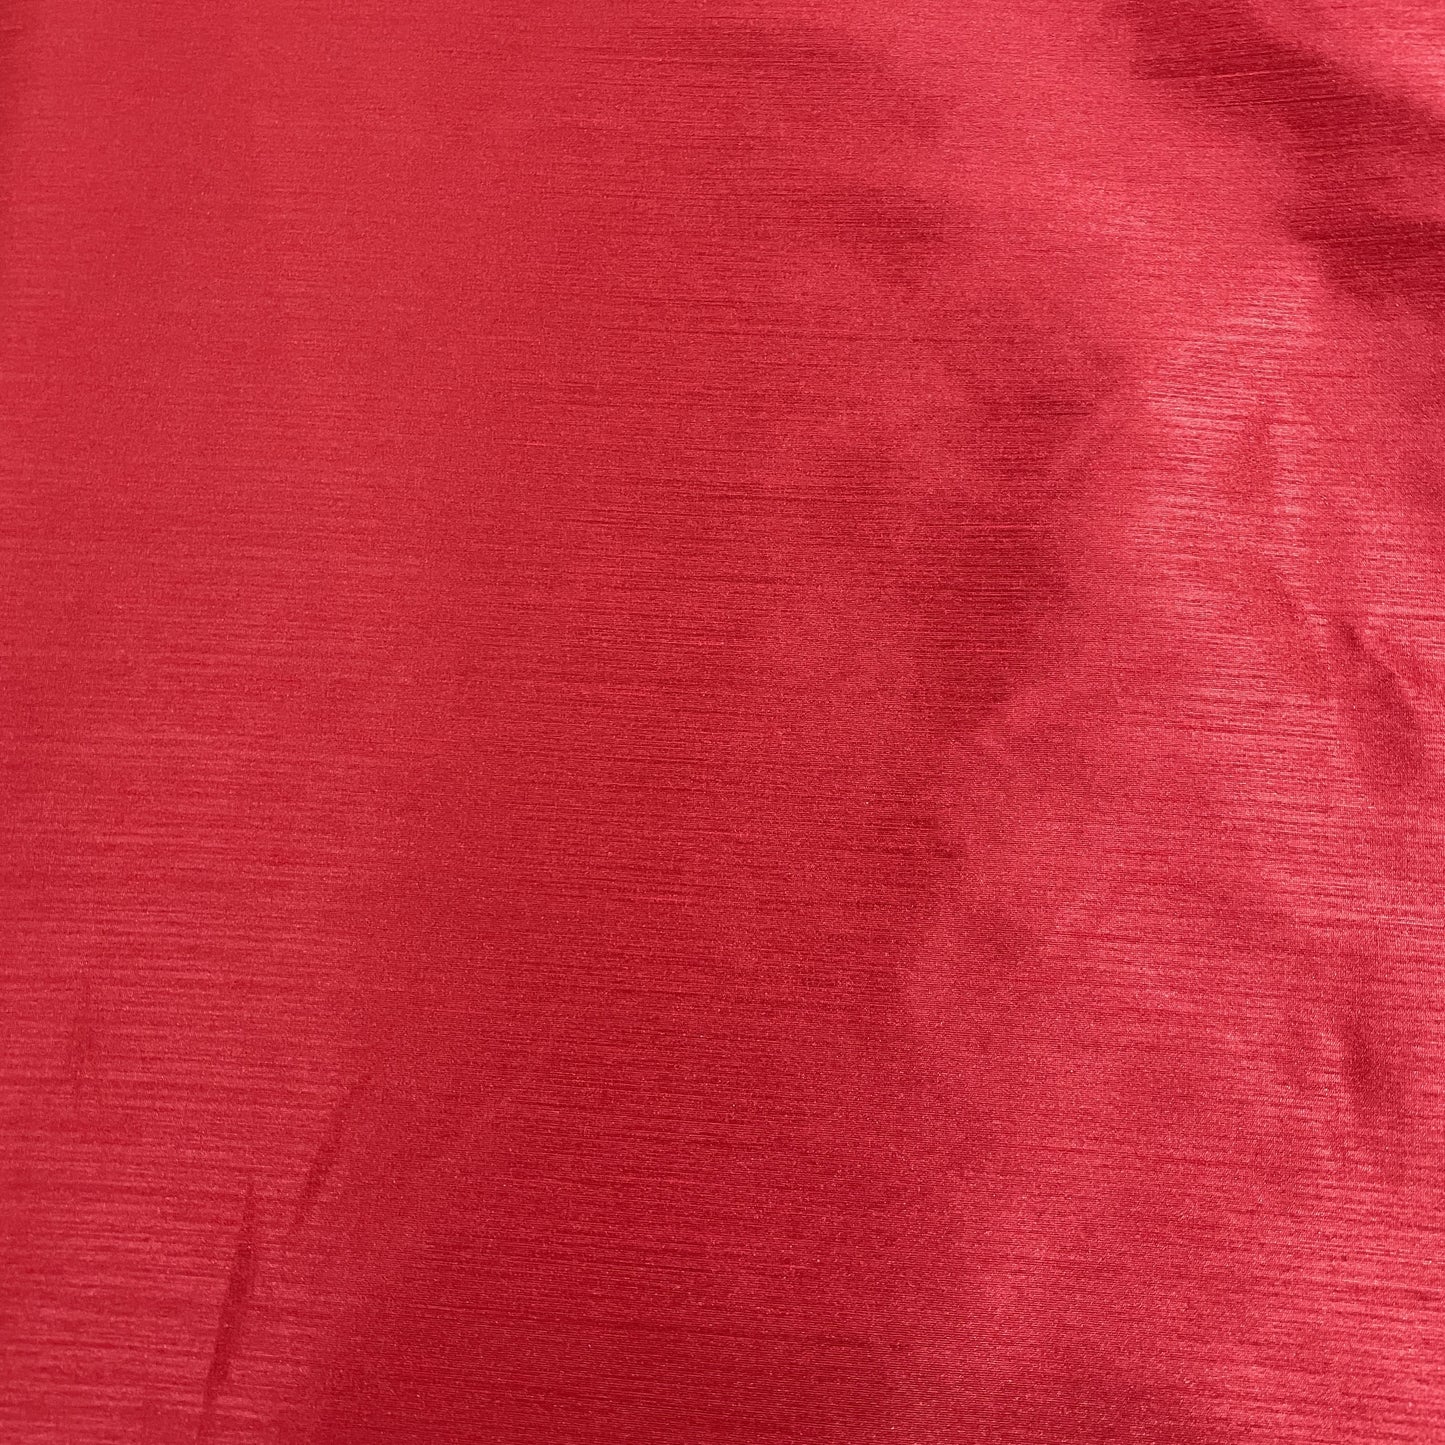 Red Solid Satin Fabric